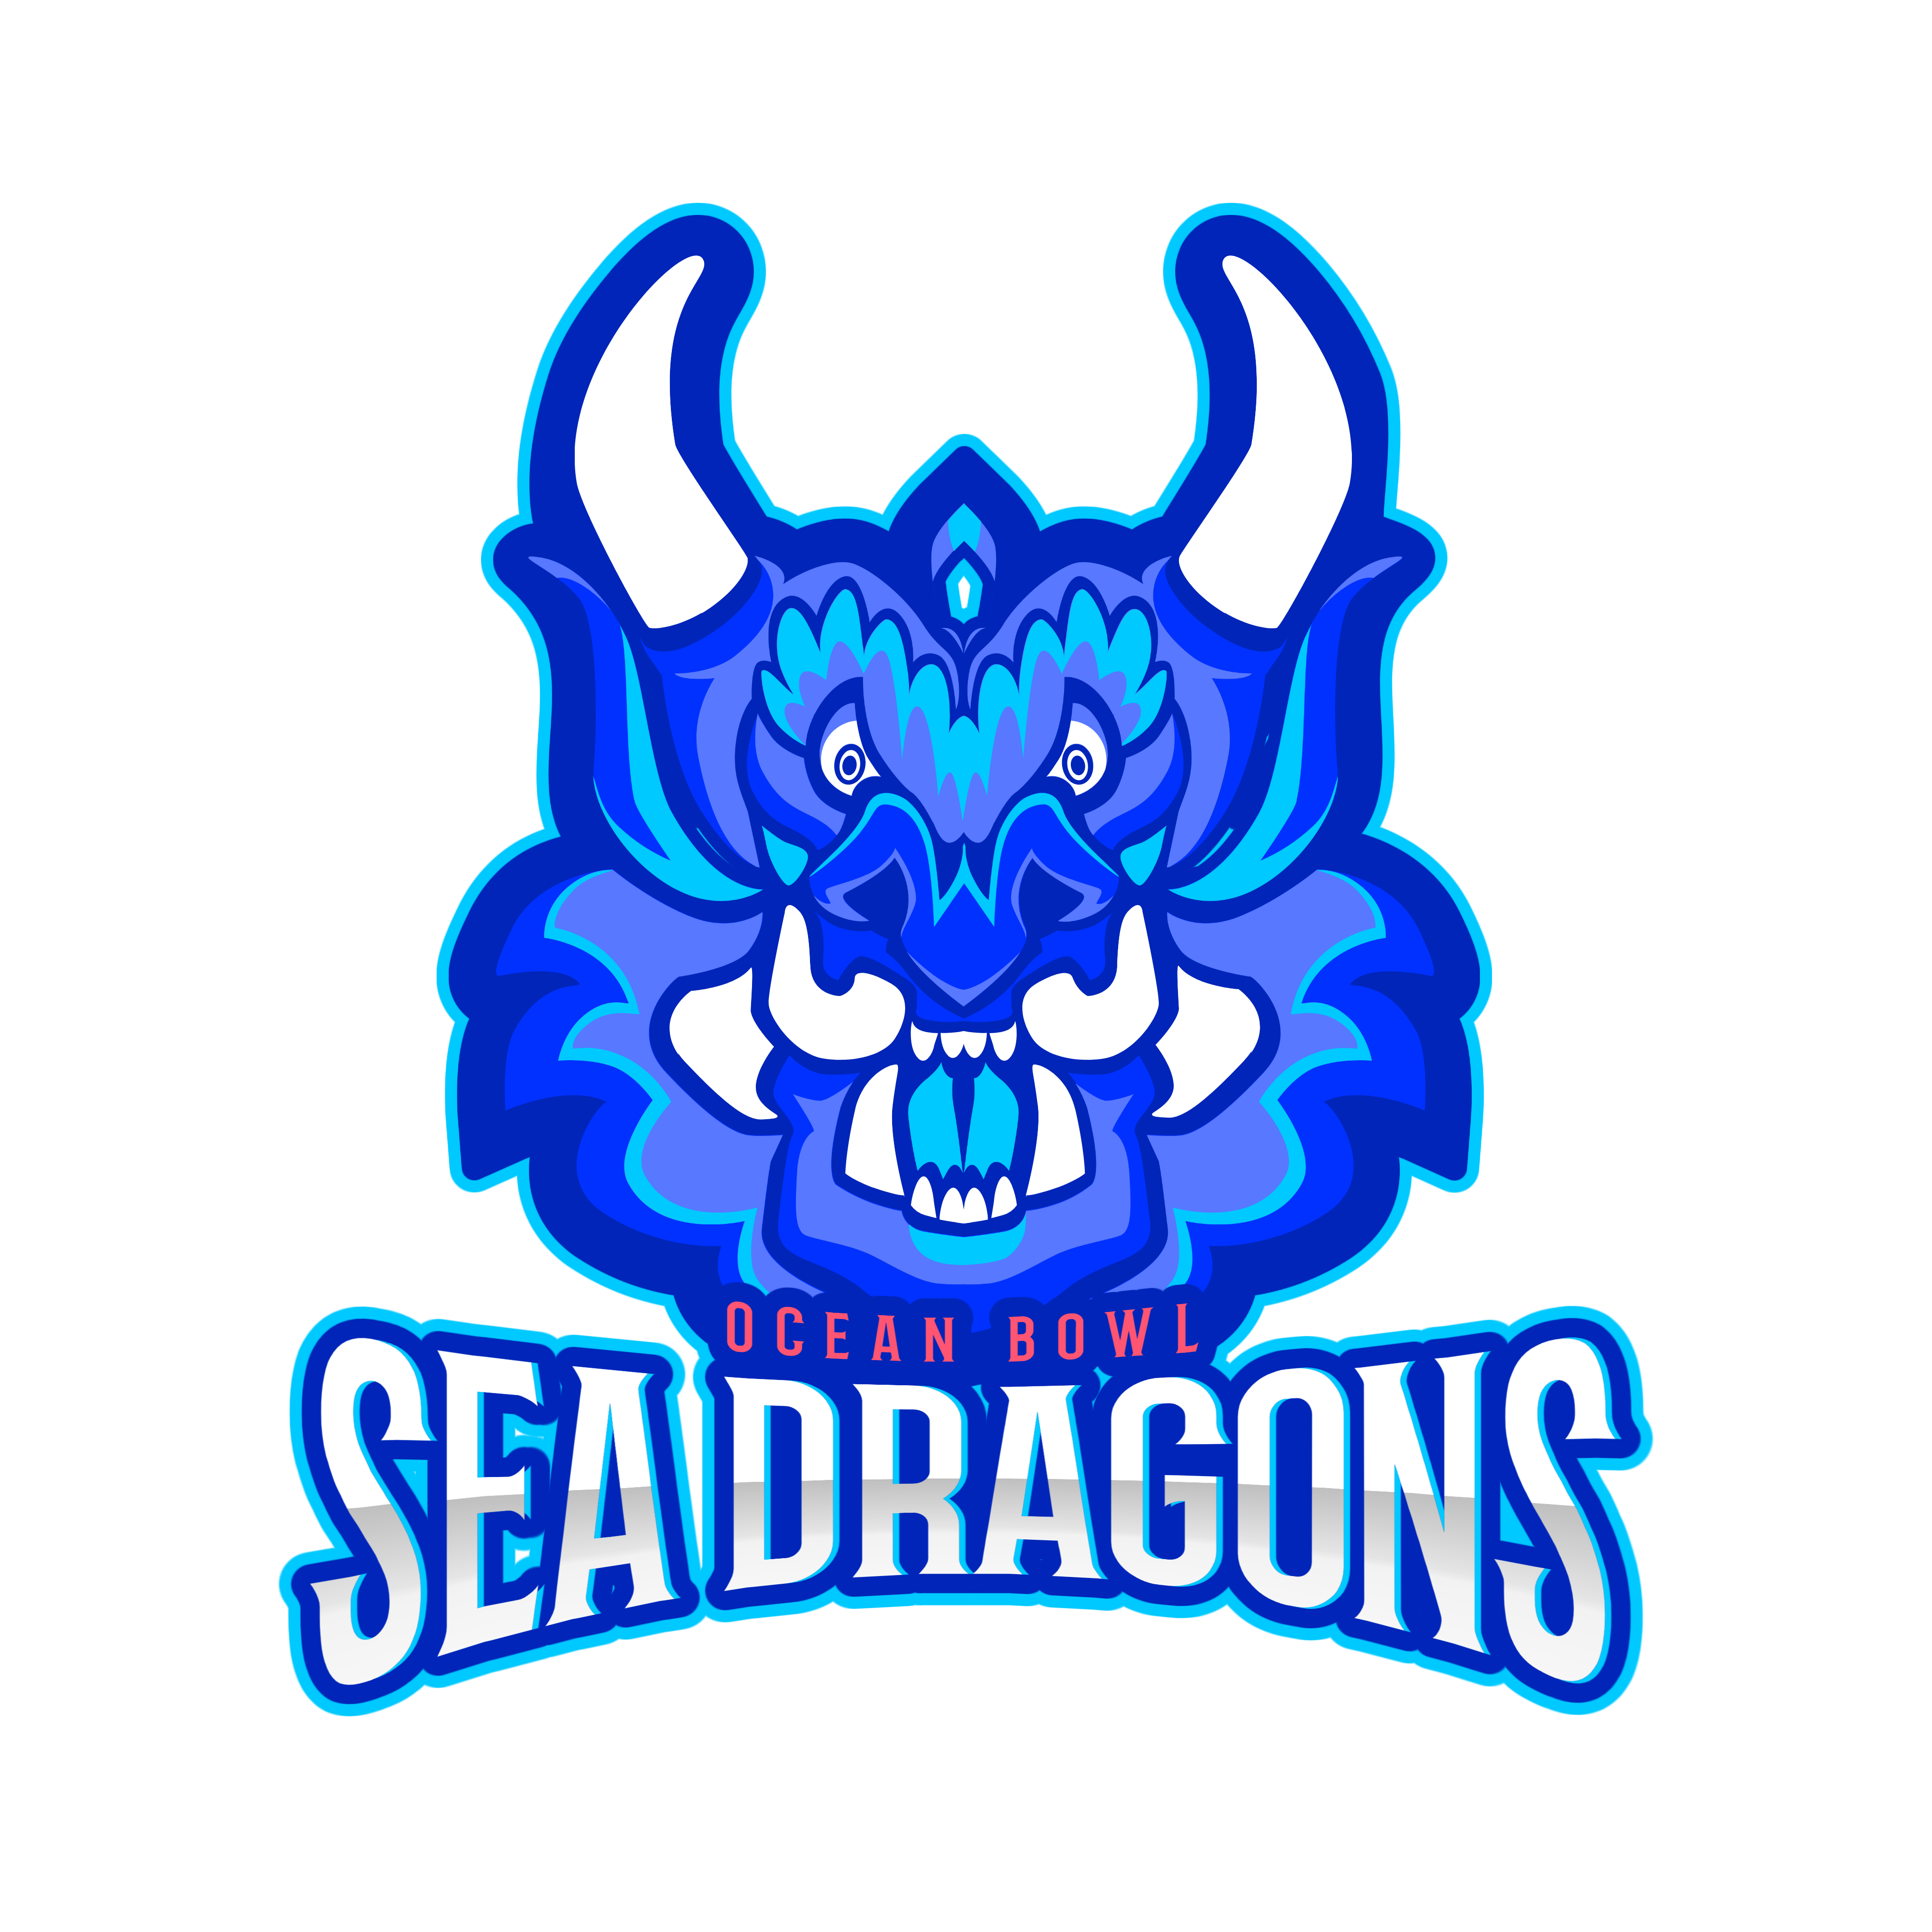 Team Day of Giving Sea Dragons's logo